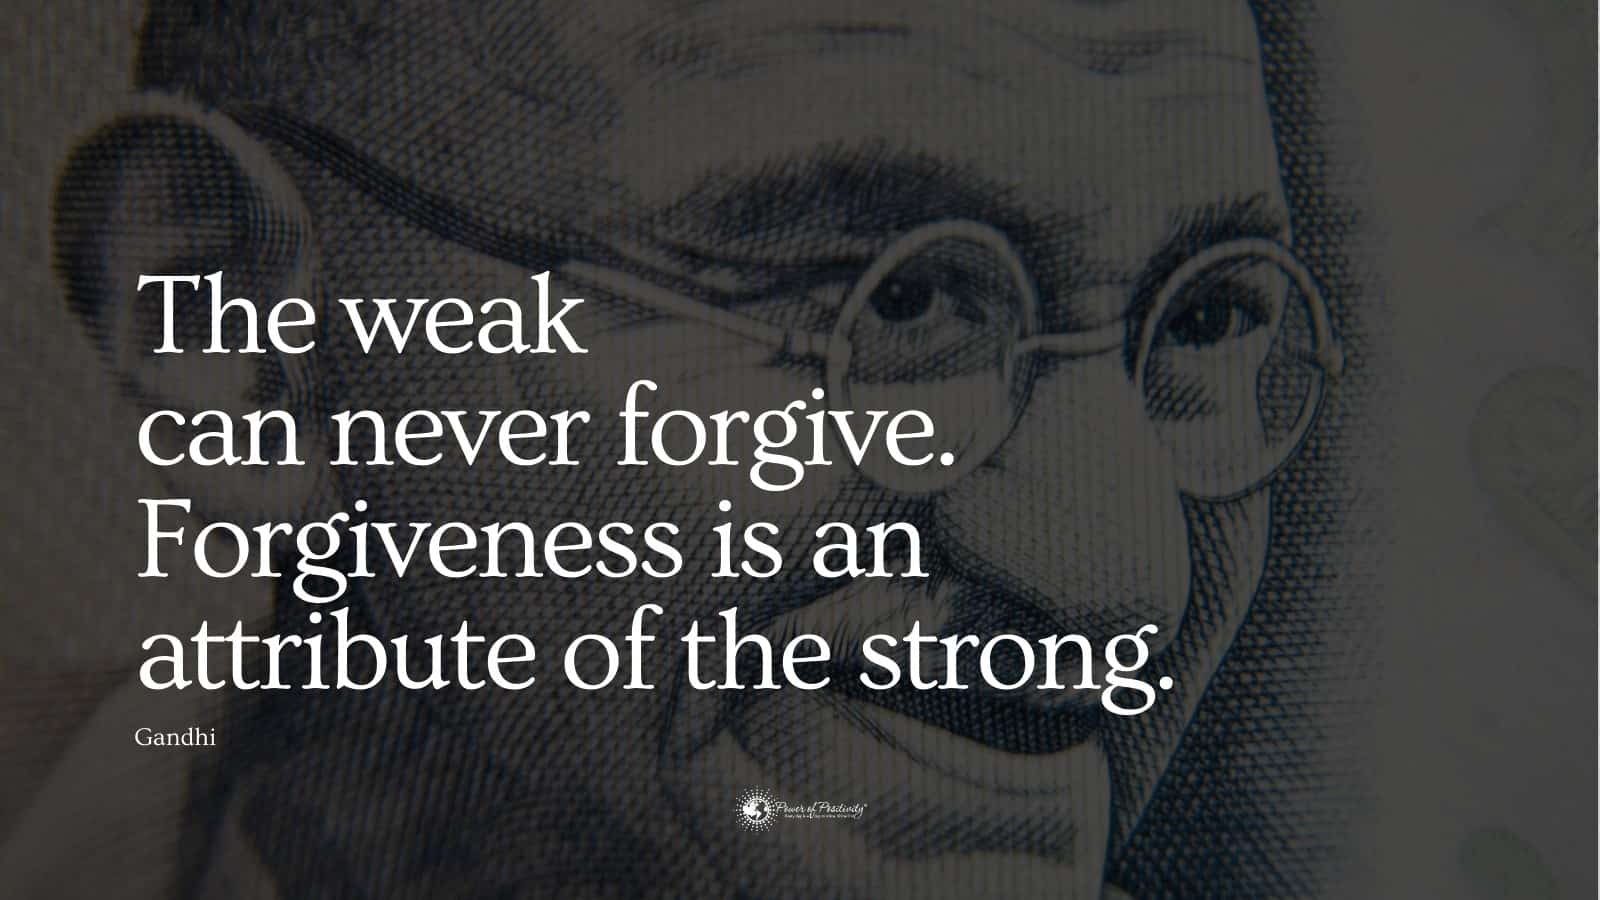 15 Quotes of Wisdom Shared with Us by Gandhi